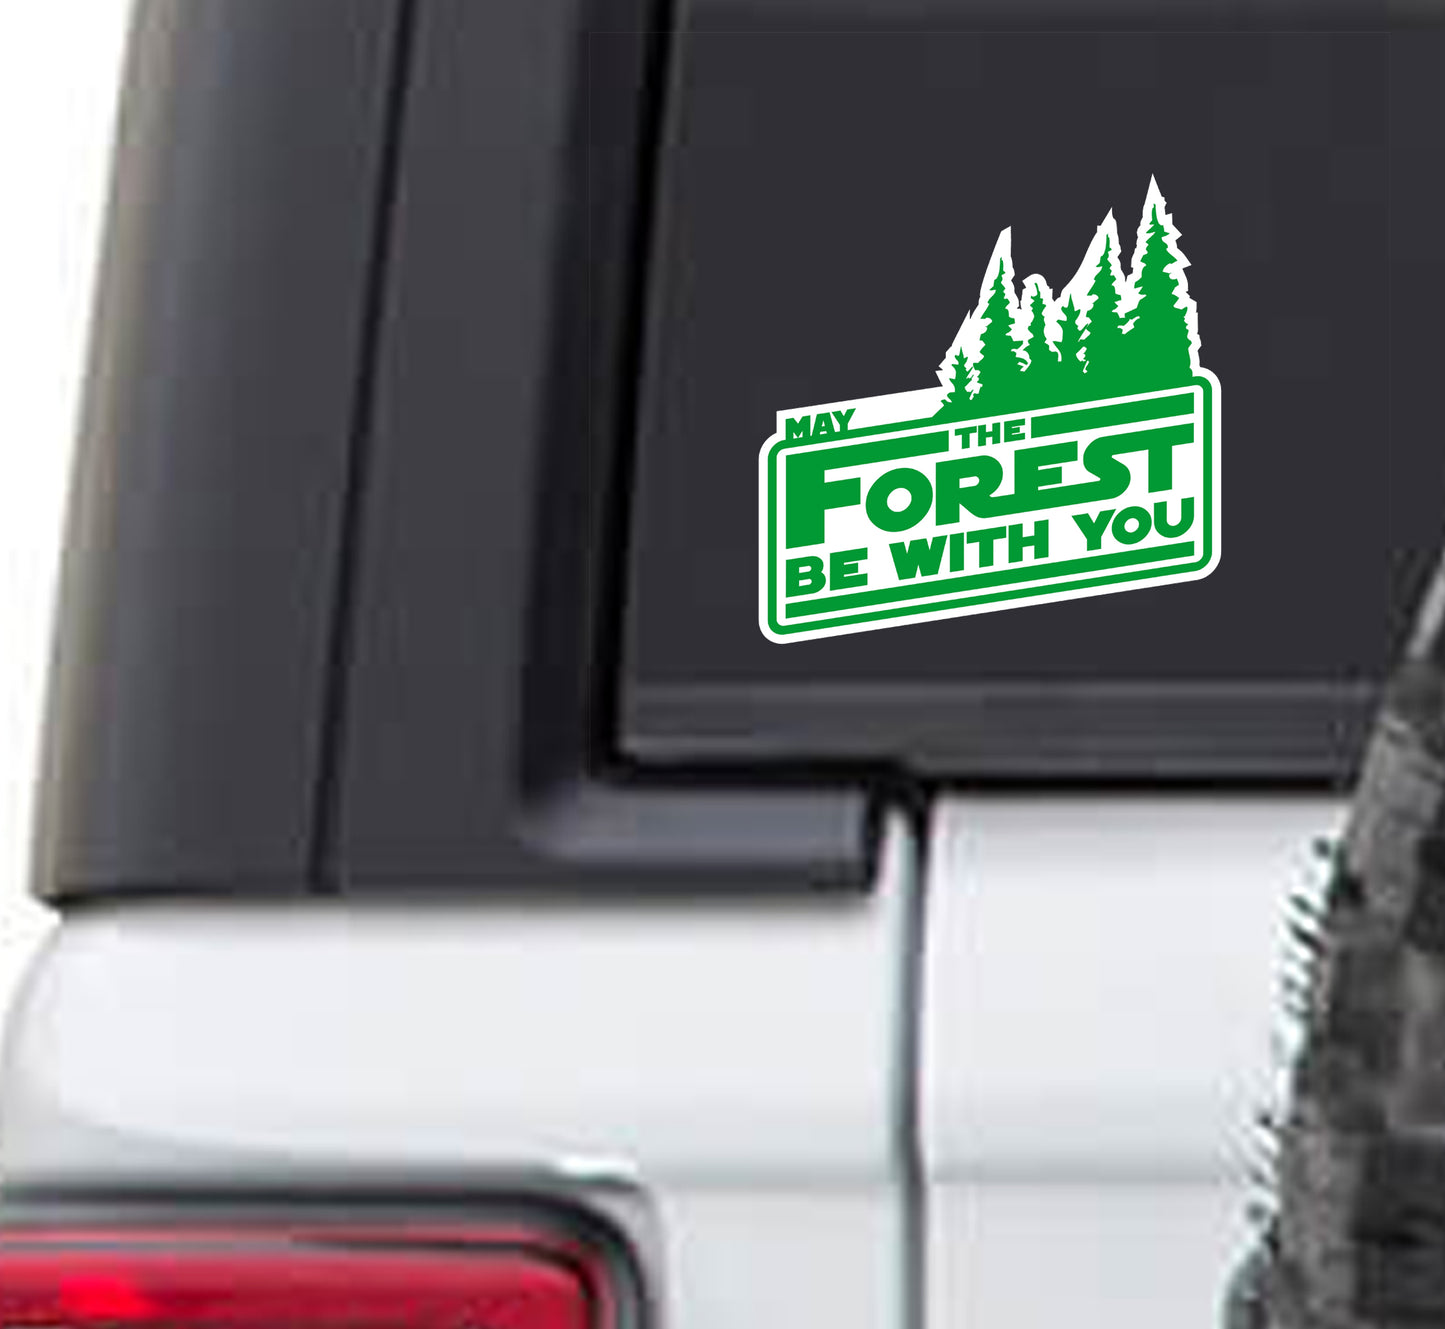 May The Forest Be With You Vinyl Sticker Decal - Camping RV Funny Star Wars Stickers May the Force Be With You hiking outdoors Tent